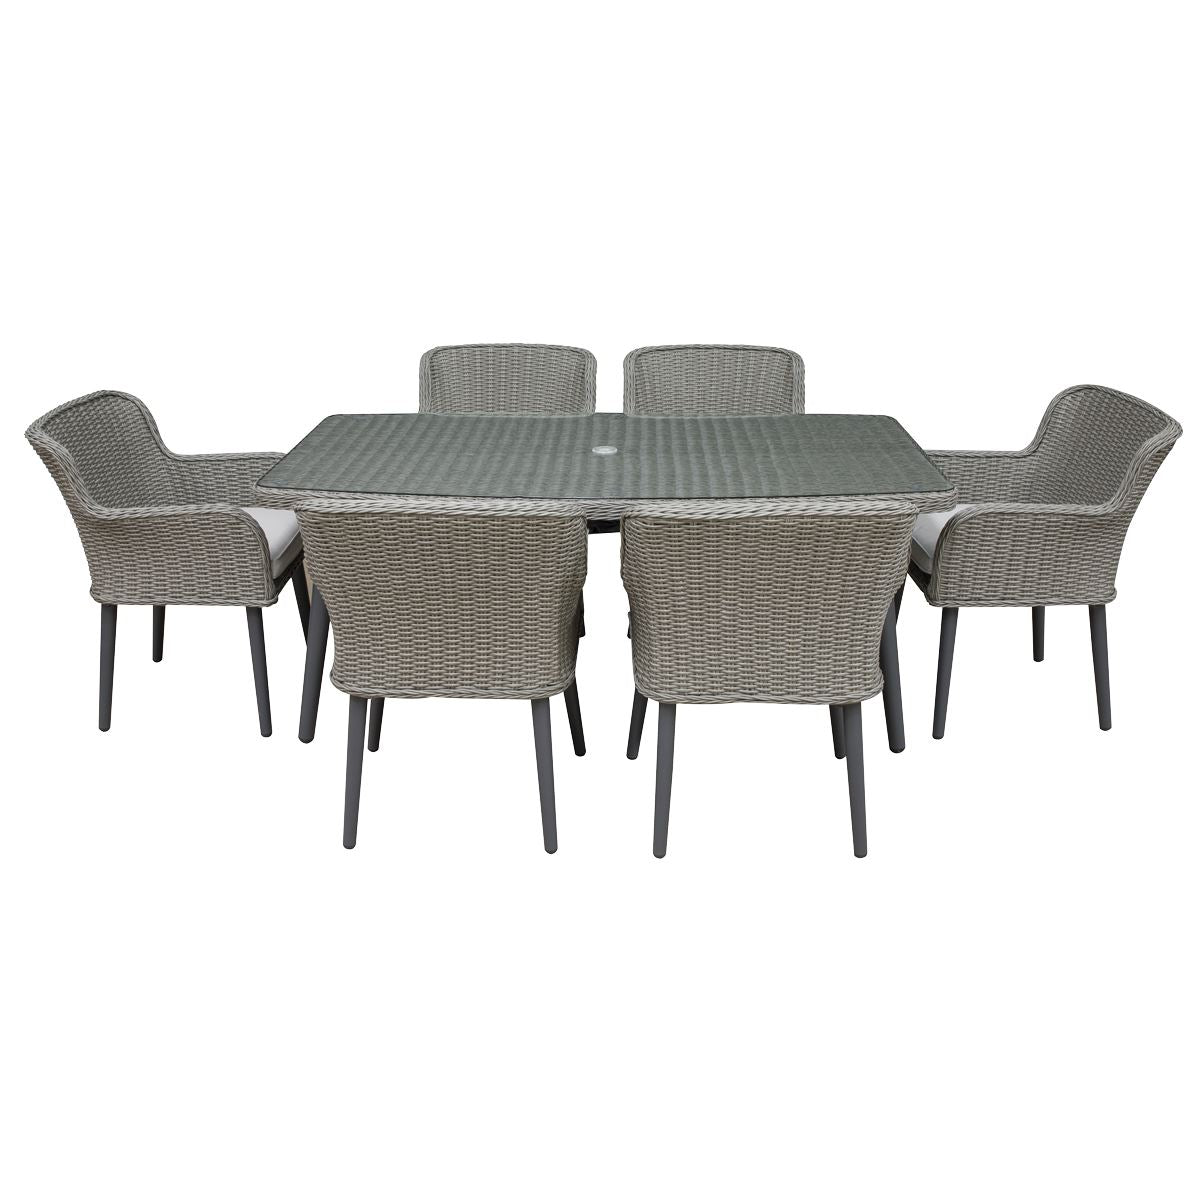 Dellonda Buxton 7 Piece Rattan Wicker Outdoor Dining Set with Tempered Glass Table Top, Grey